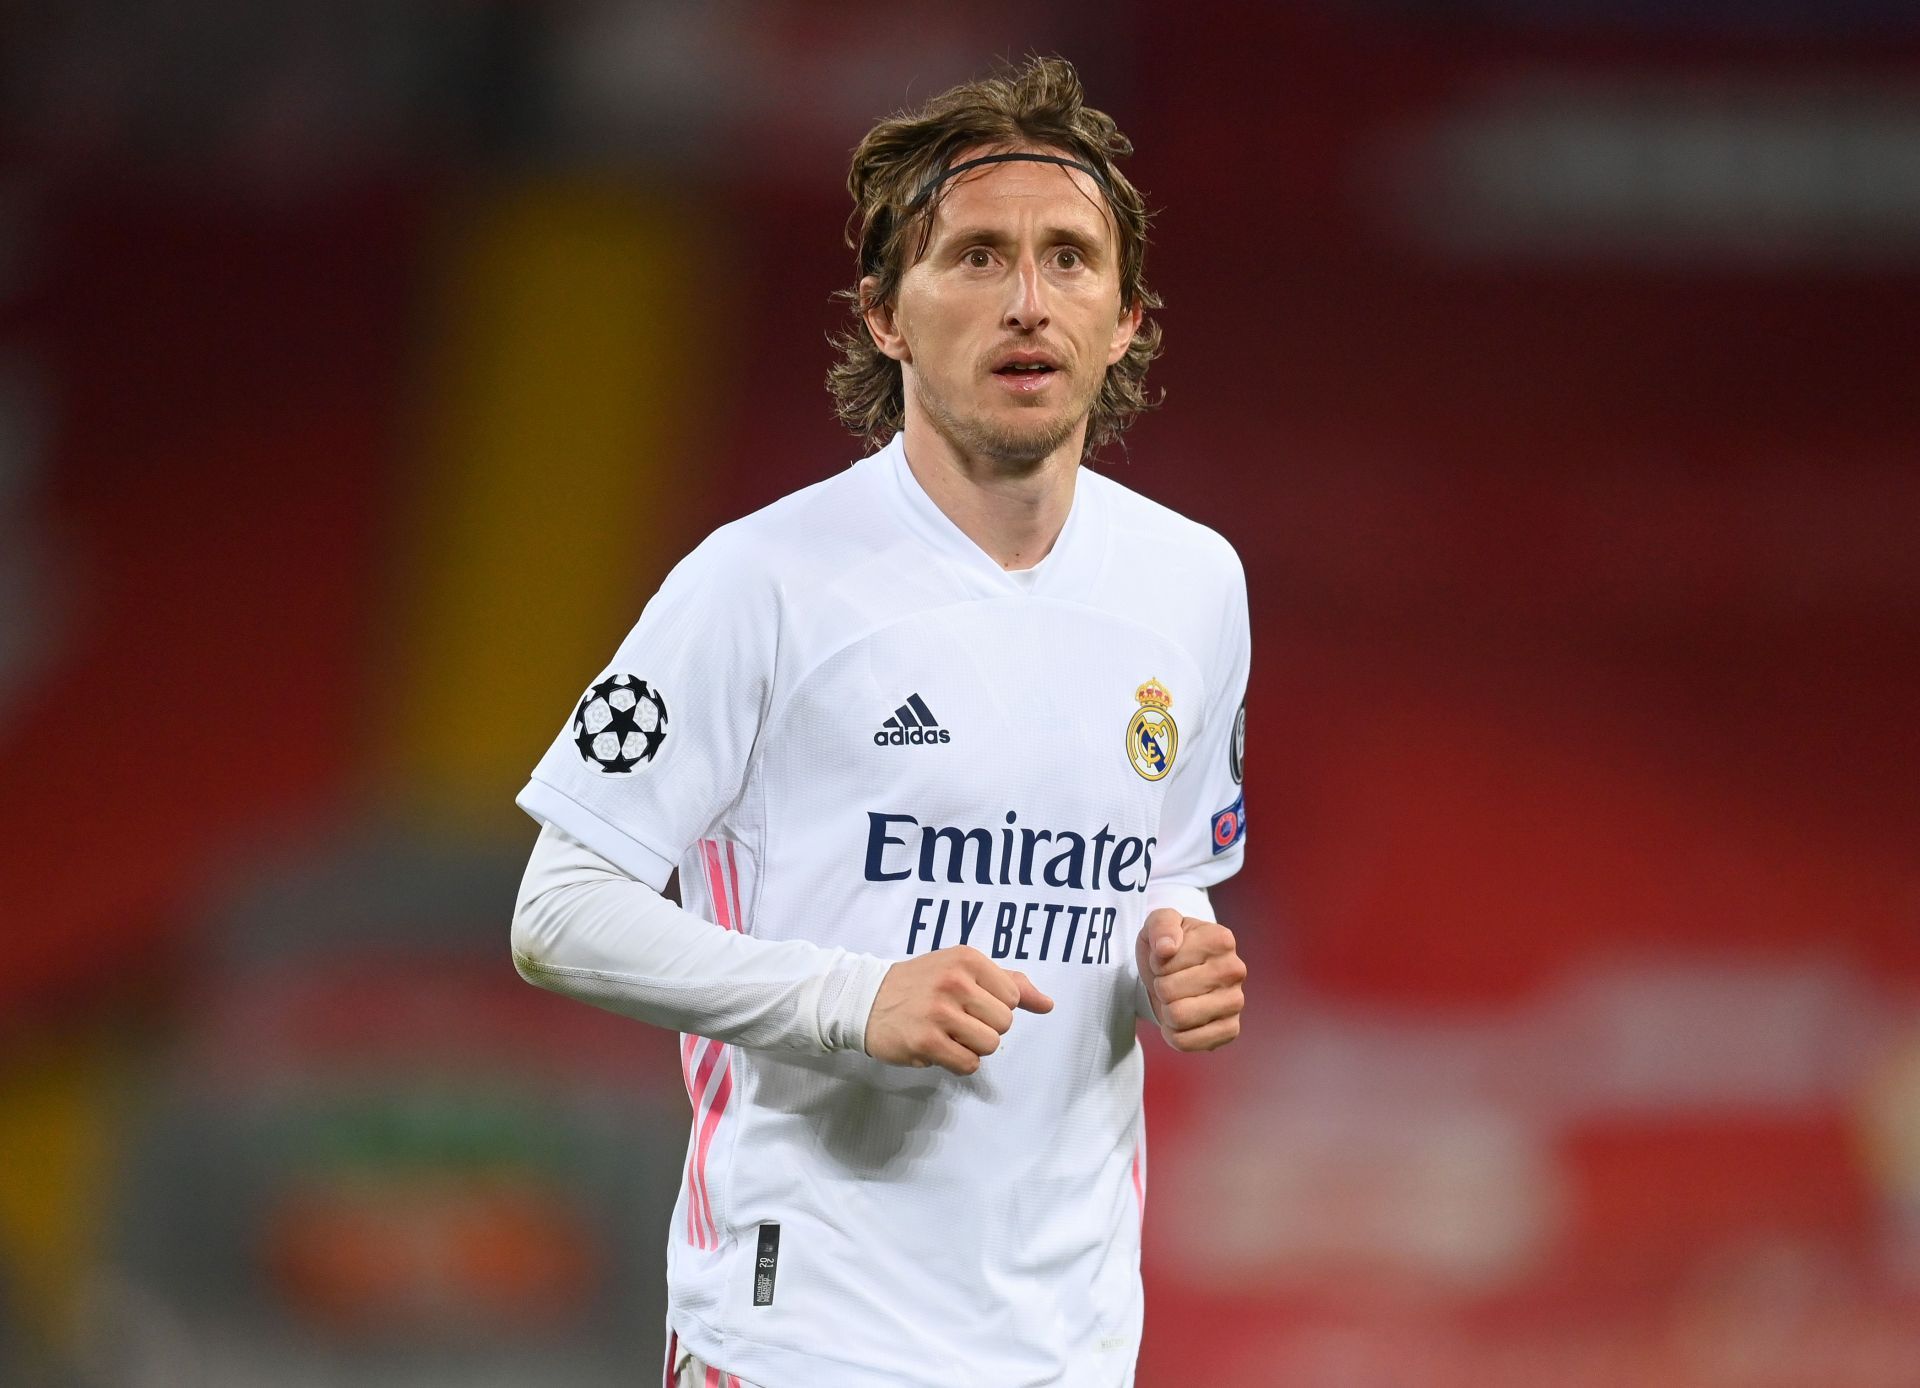 Luka Modric is likely to renew his contract with Los Blancos